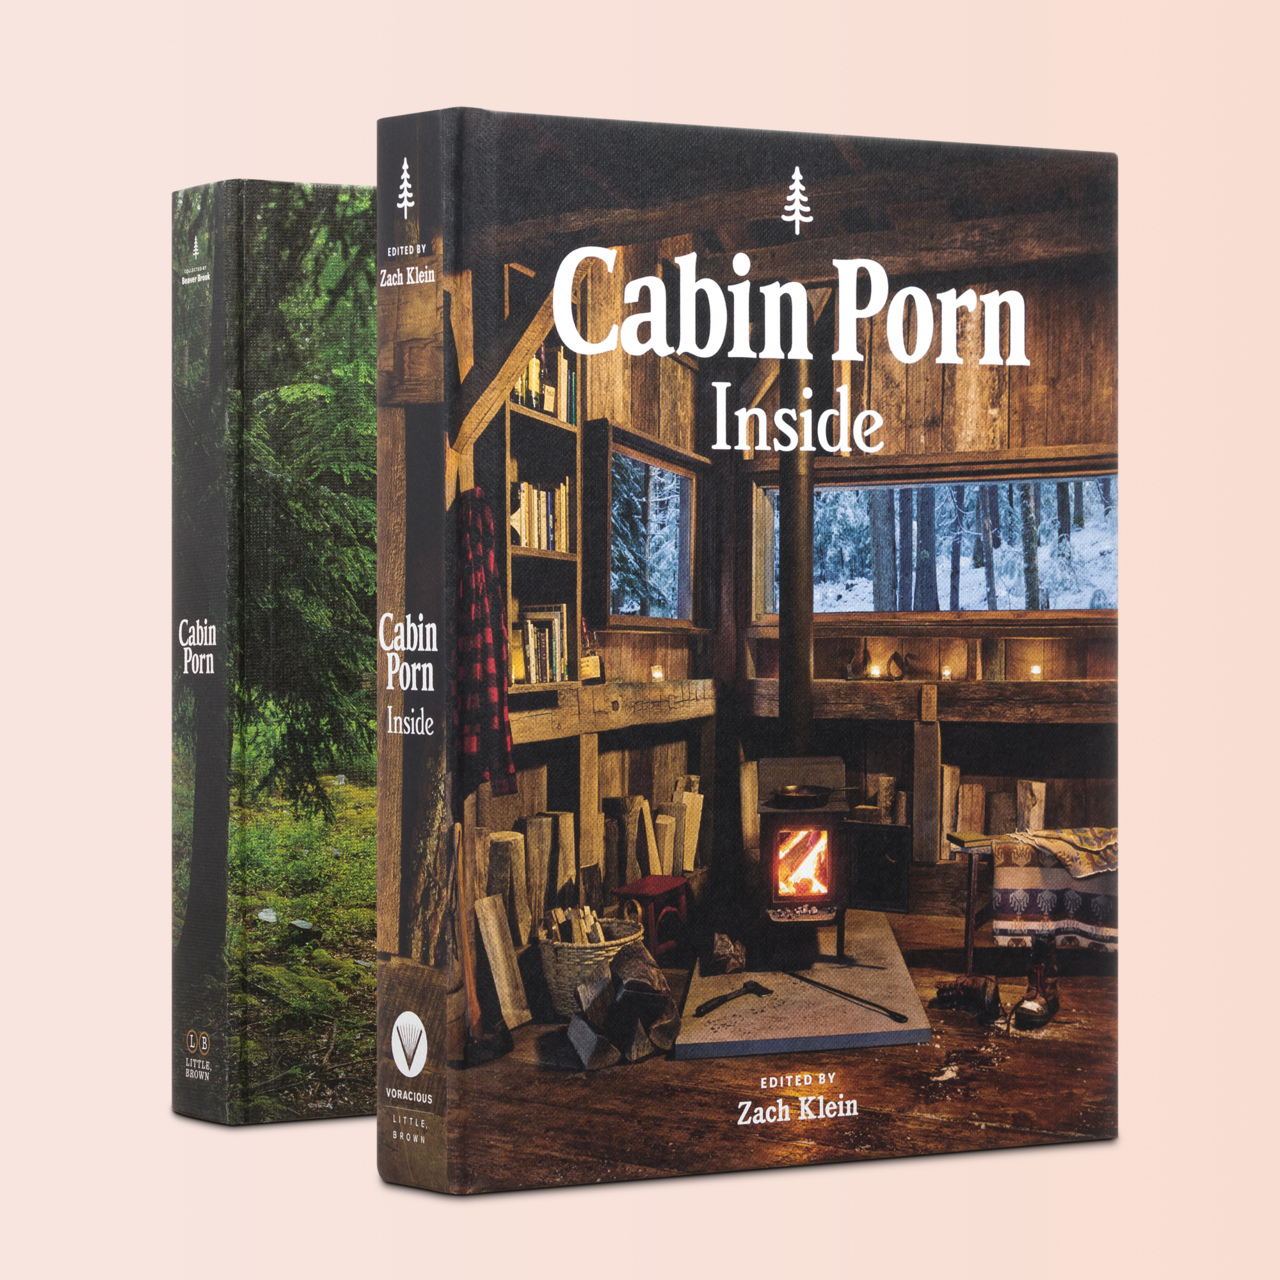 cabinporn:
“Introducing the next book in the Cabin Porn series: Inside. We focused on the interiors of handmade homes and tried to make an inspirational reference for anyone making a space, a retreat or a home in town. Nearly 100 unique places are...